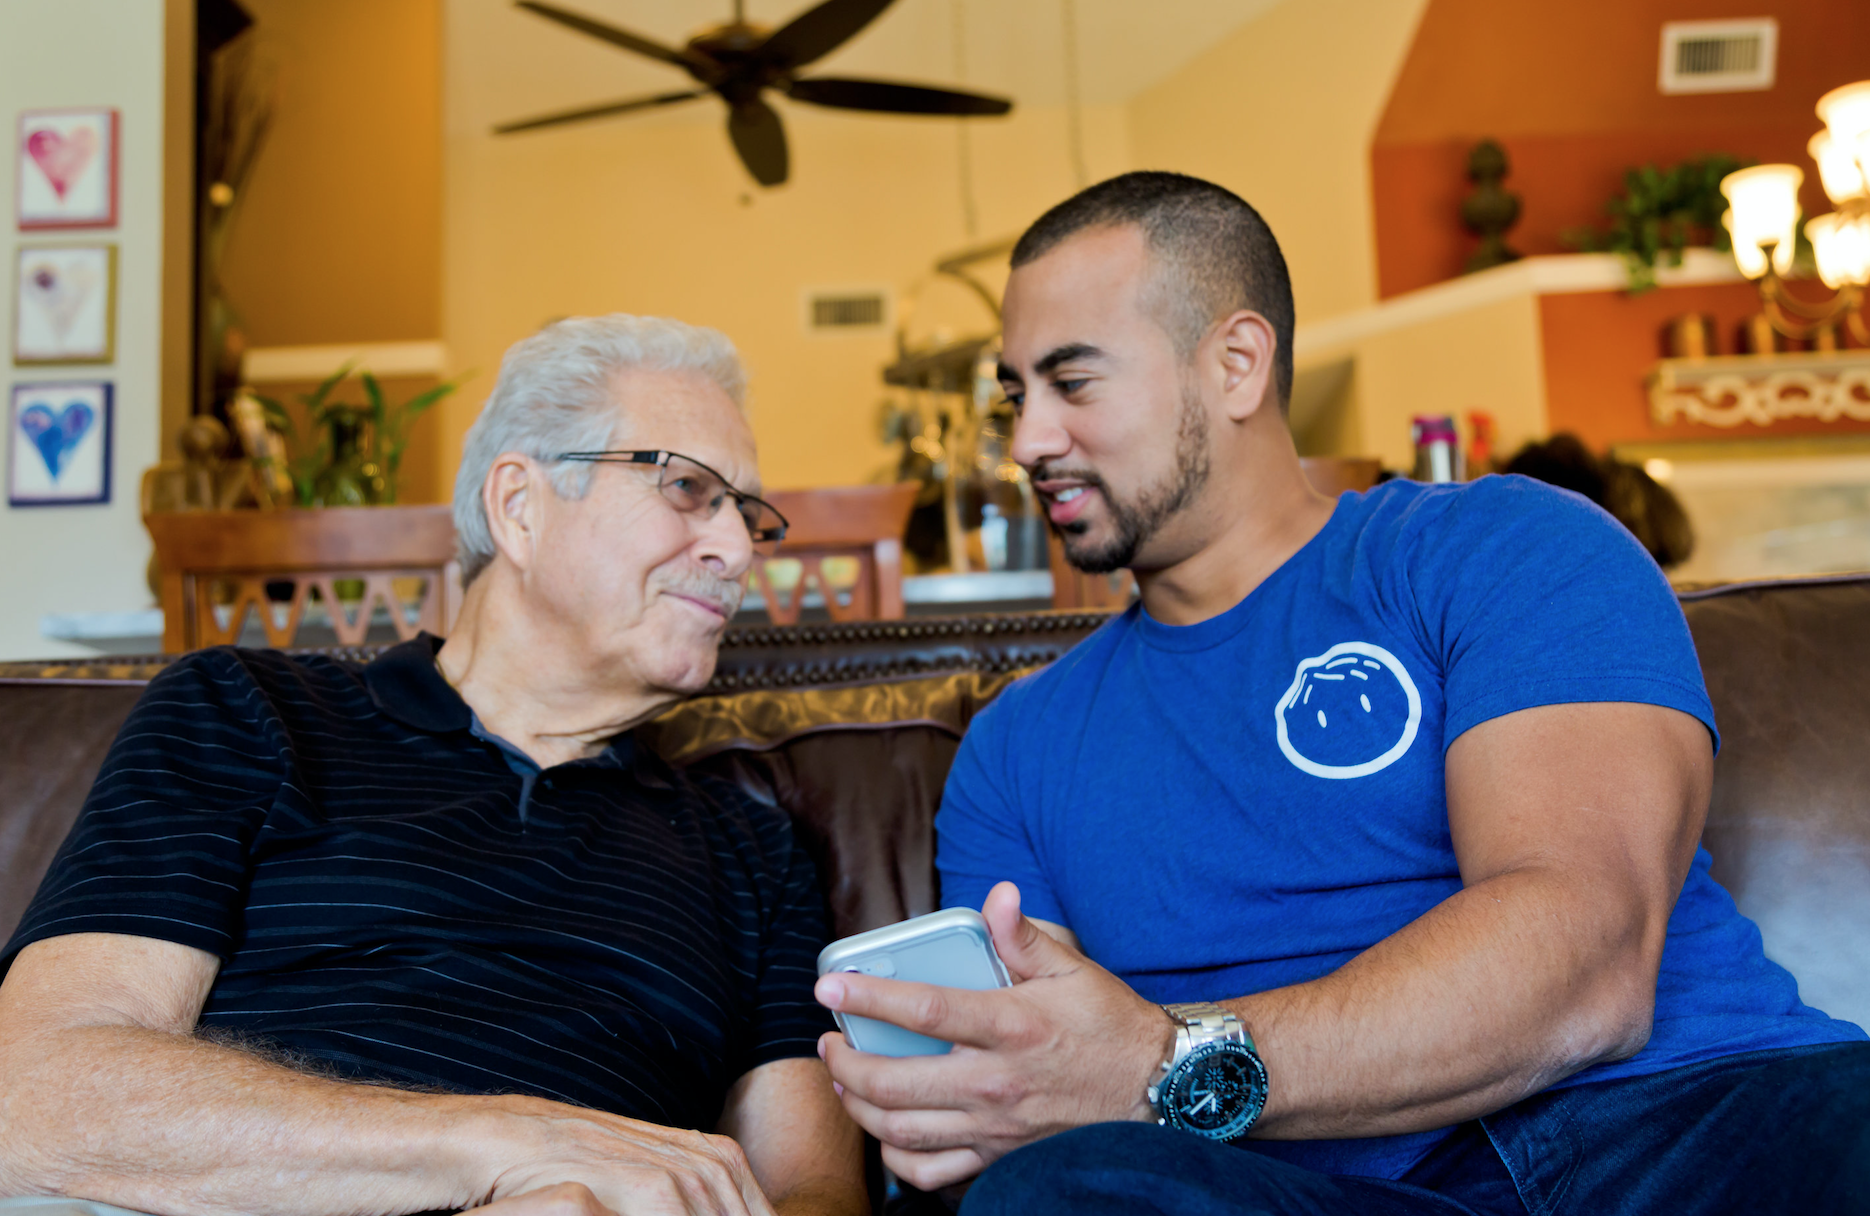 A college student who is a Papa Pal spends time with an aging senior